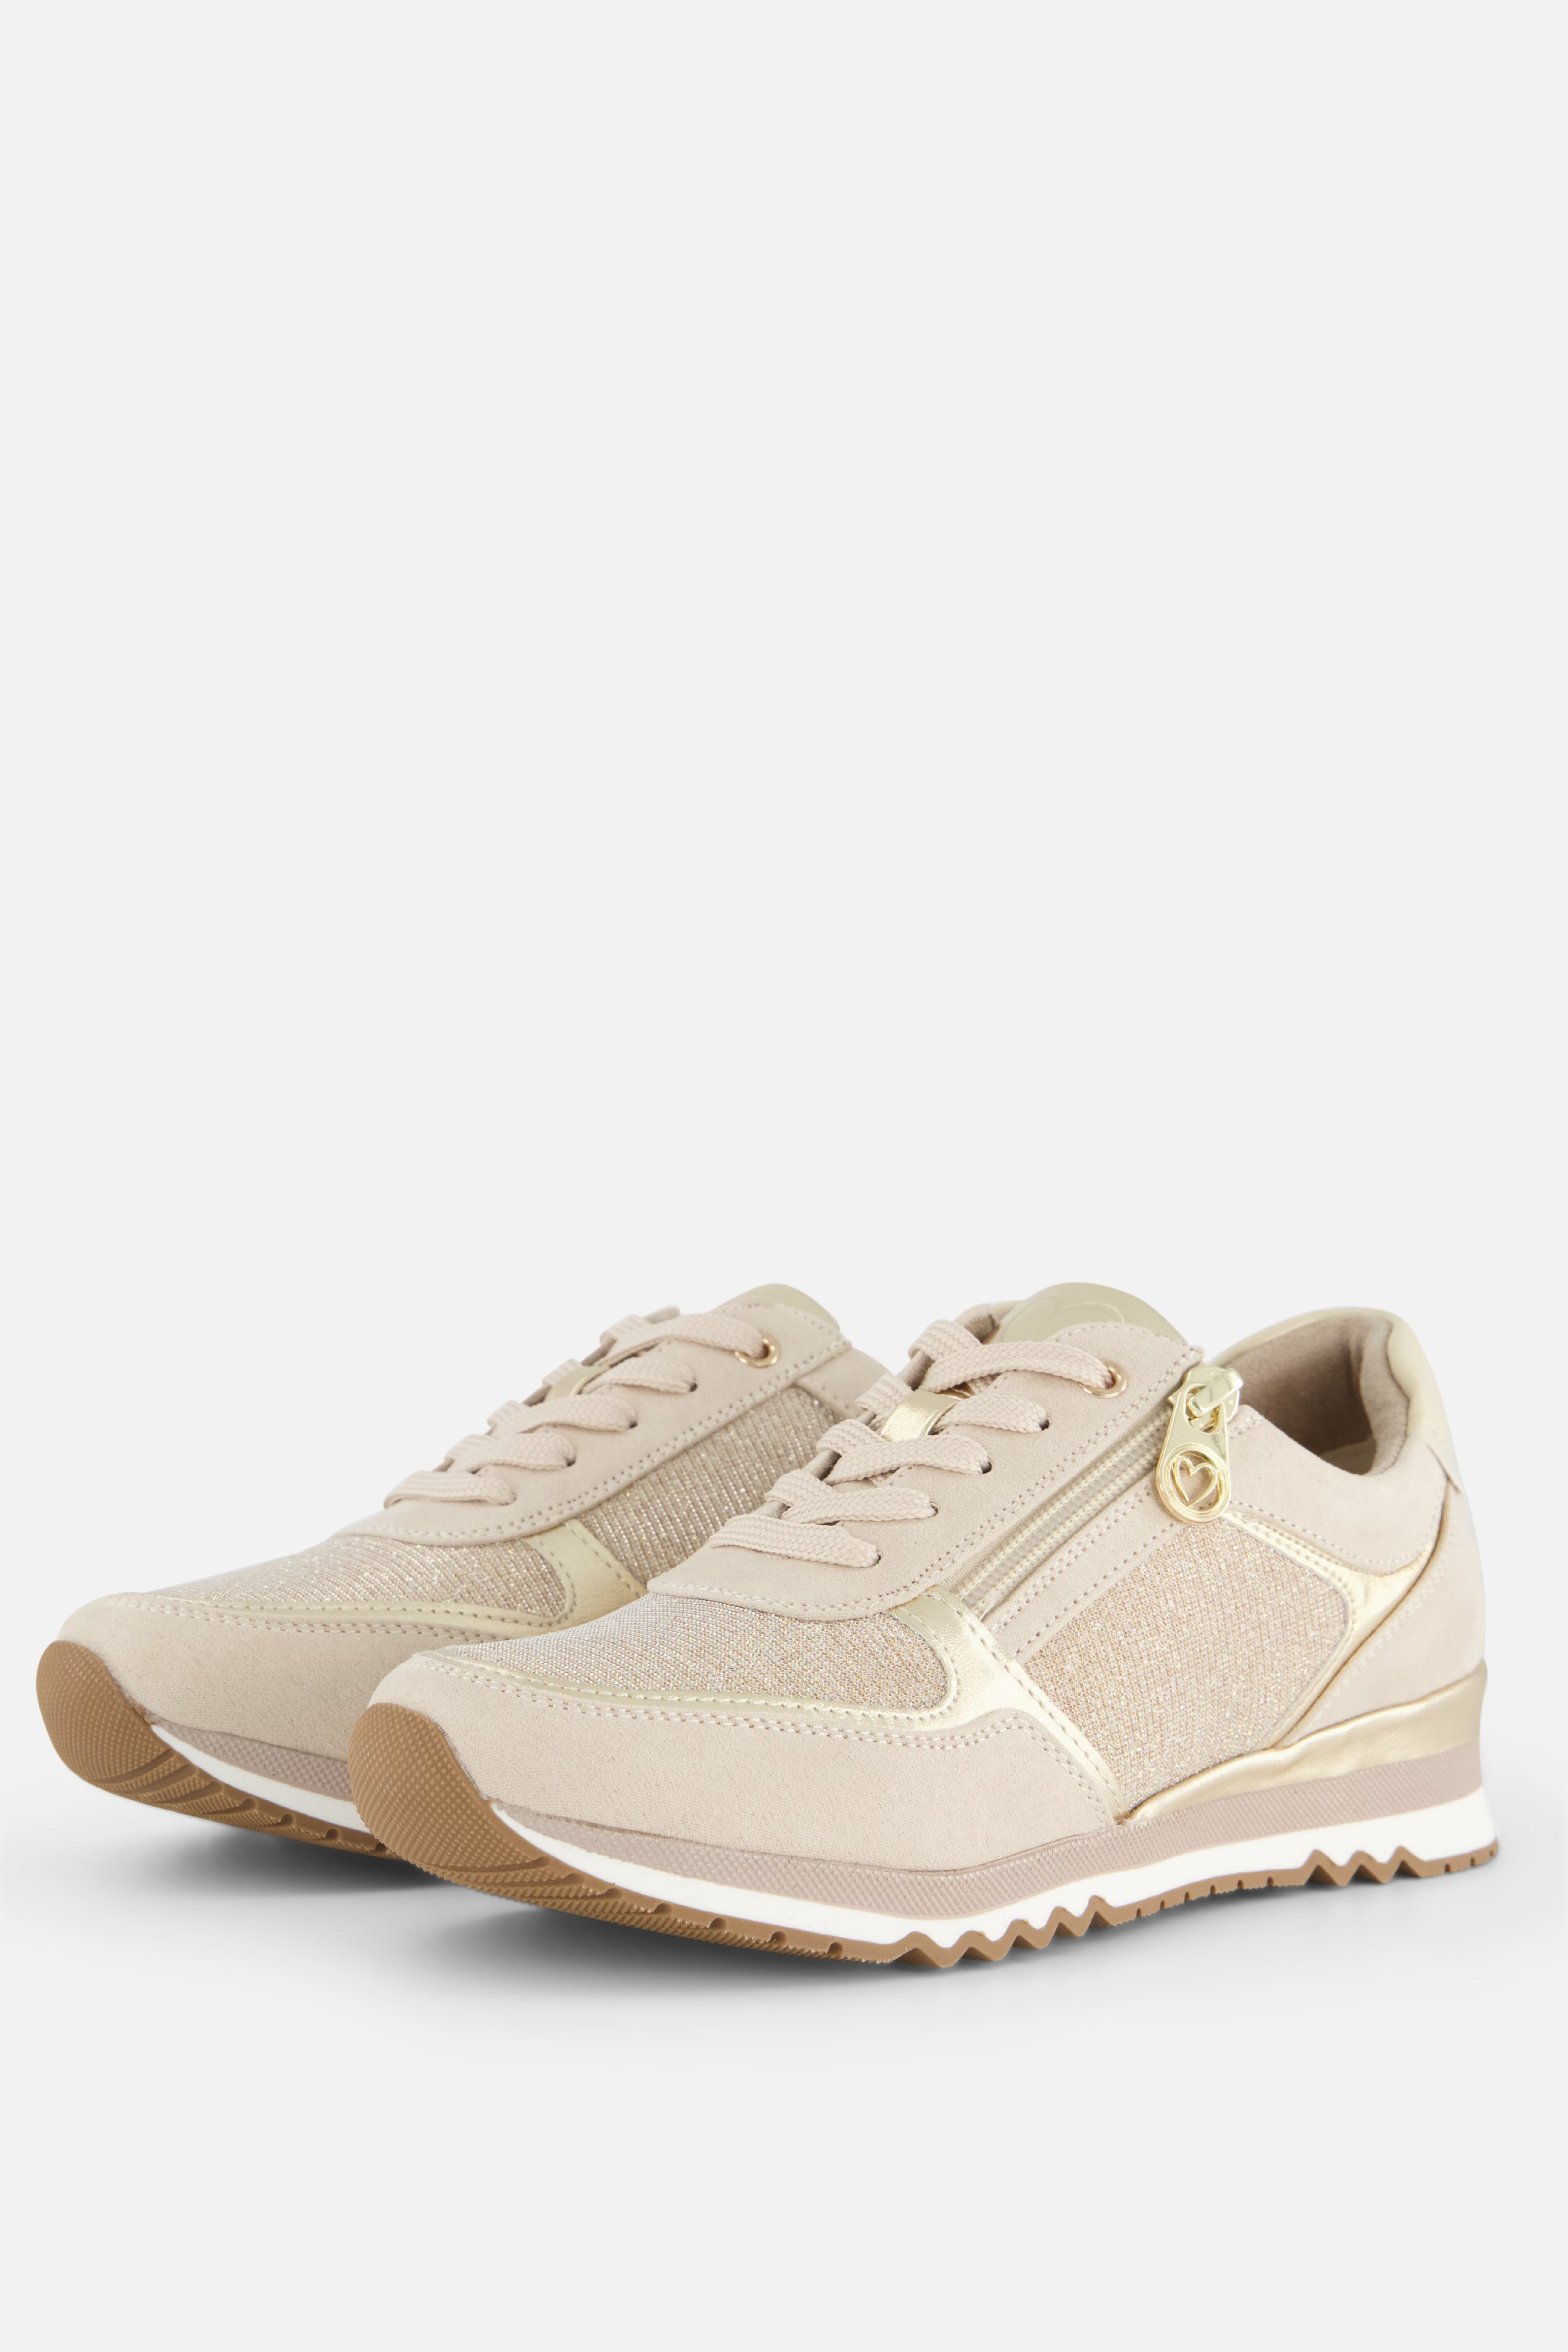 Marco Tozzi Marco Tozzi Sneakers beige Synthetisch